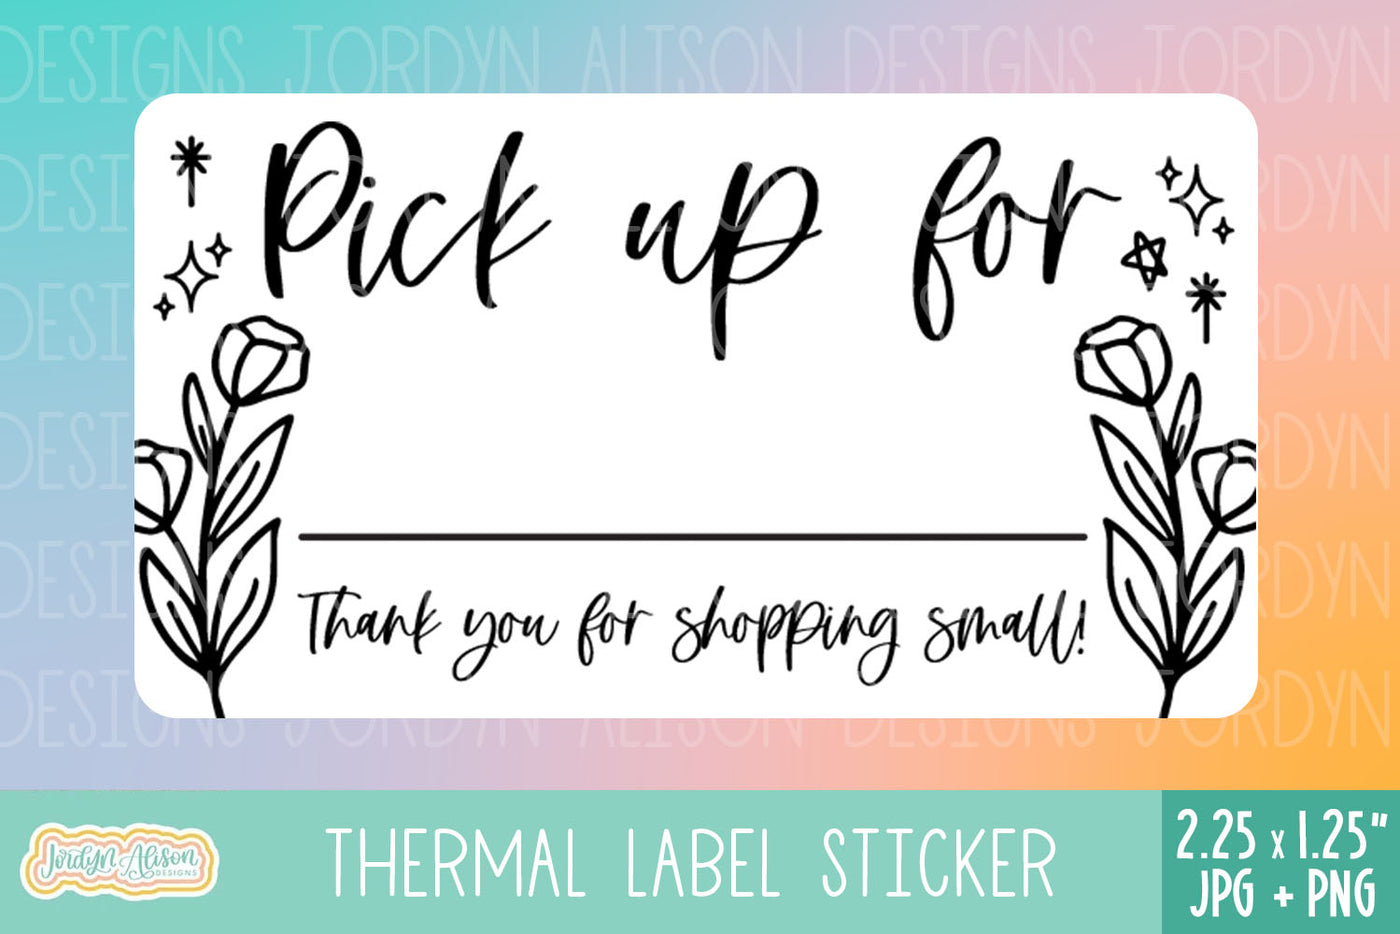 Pick Up For Thermal Label Design